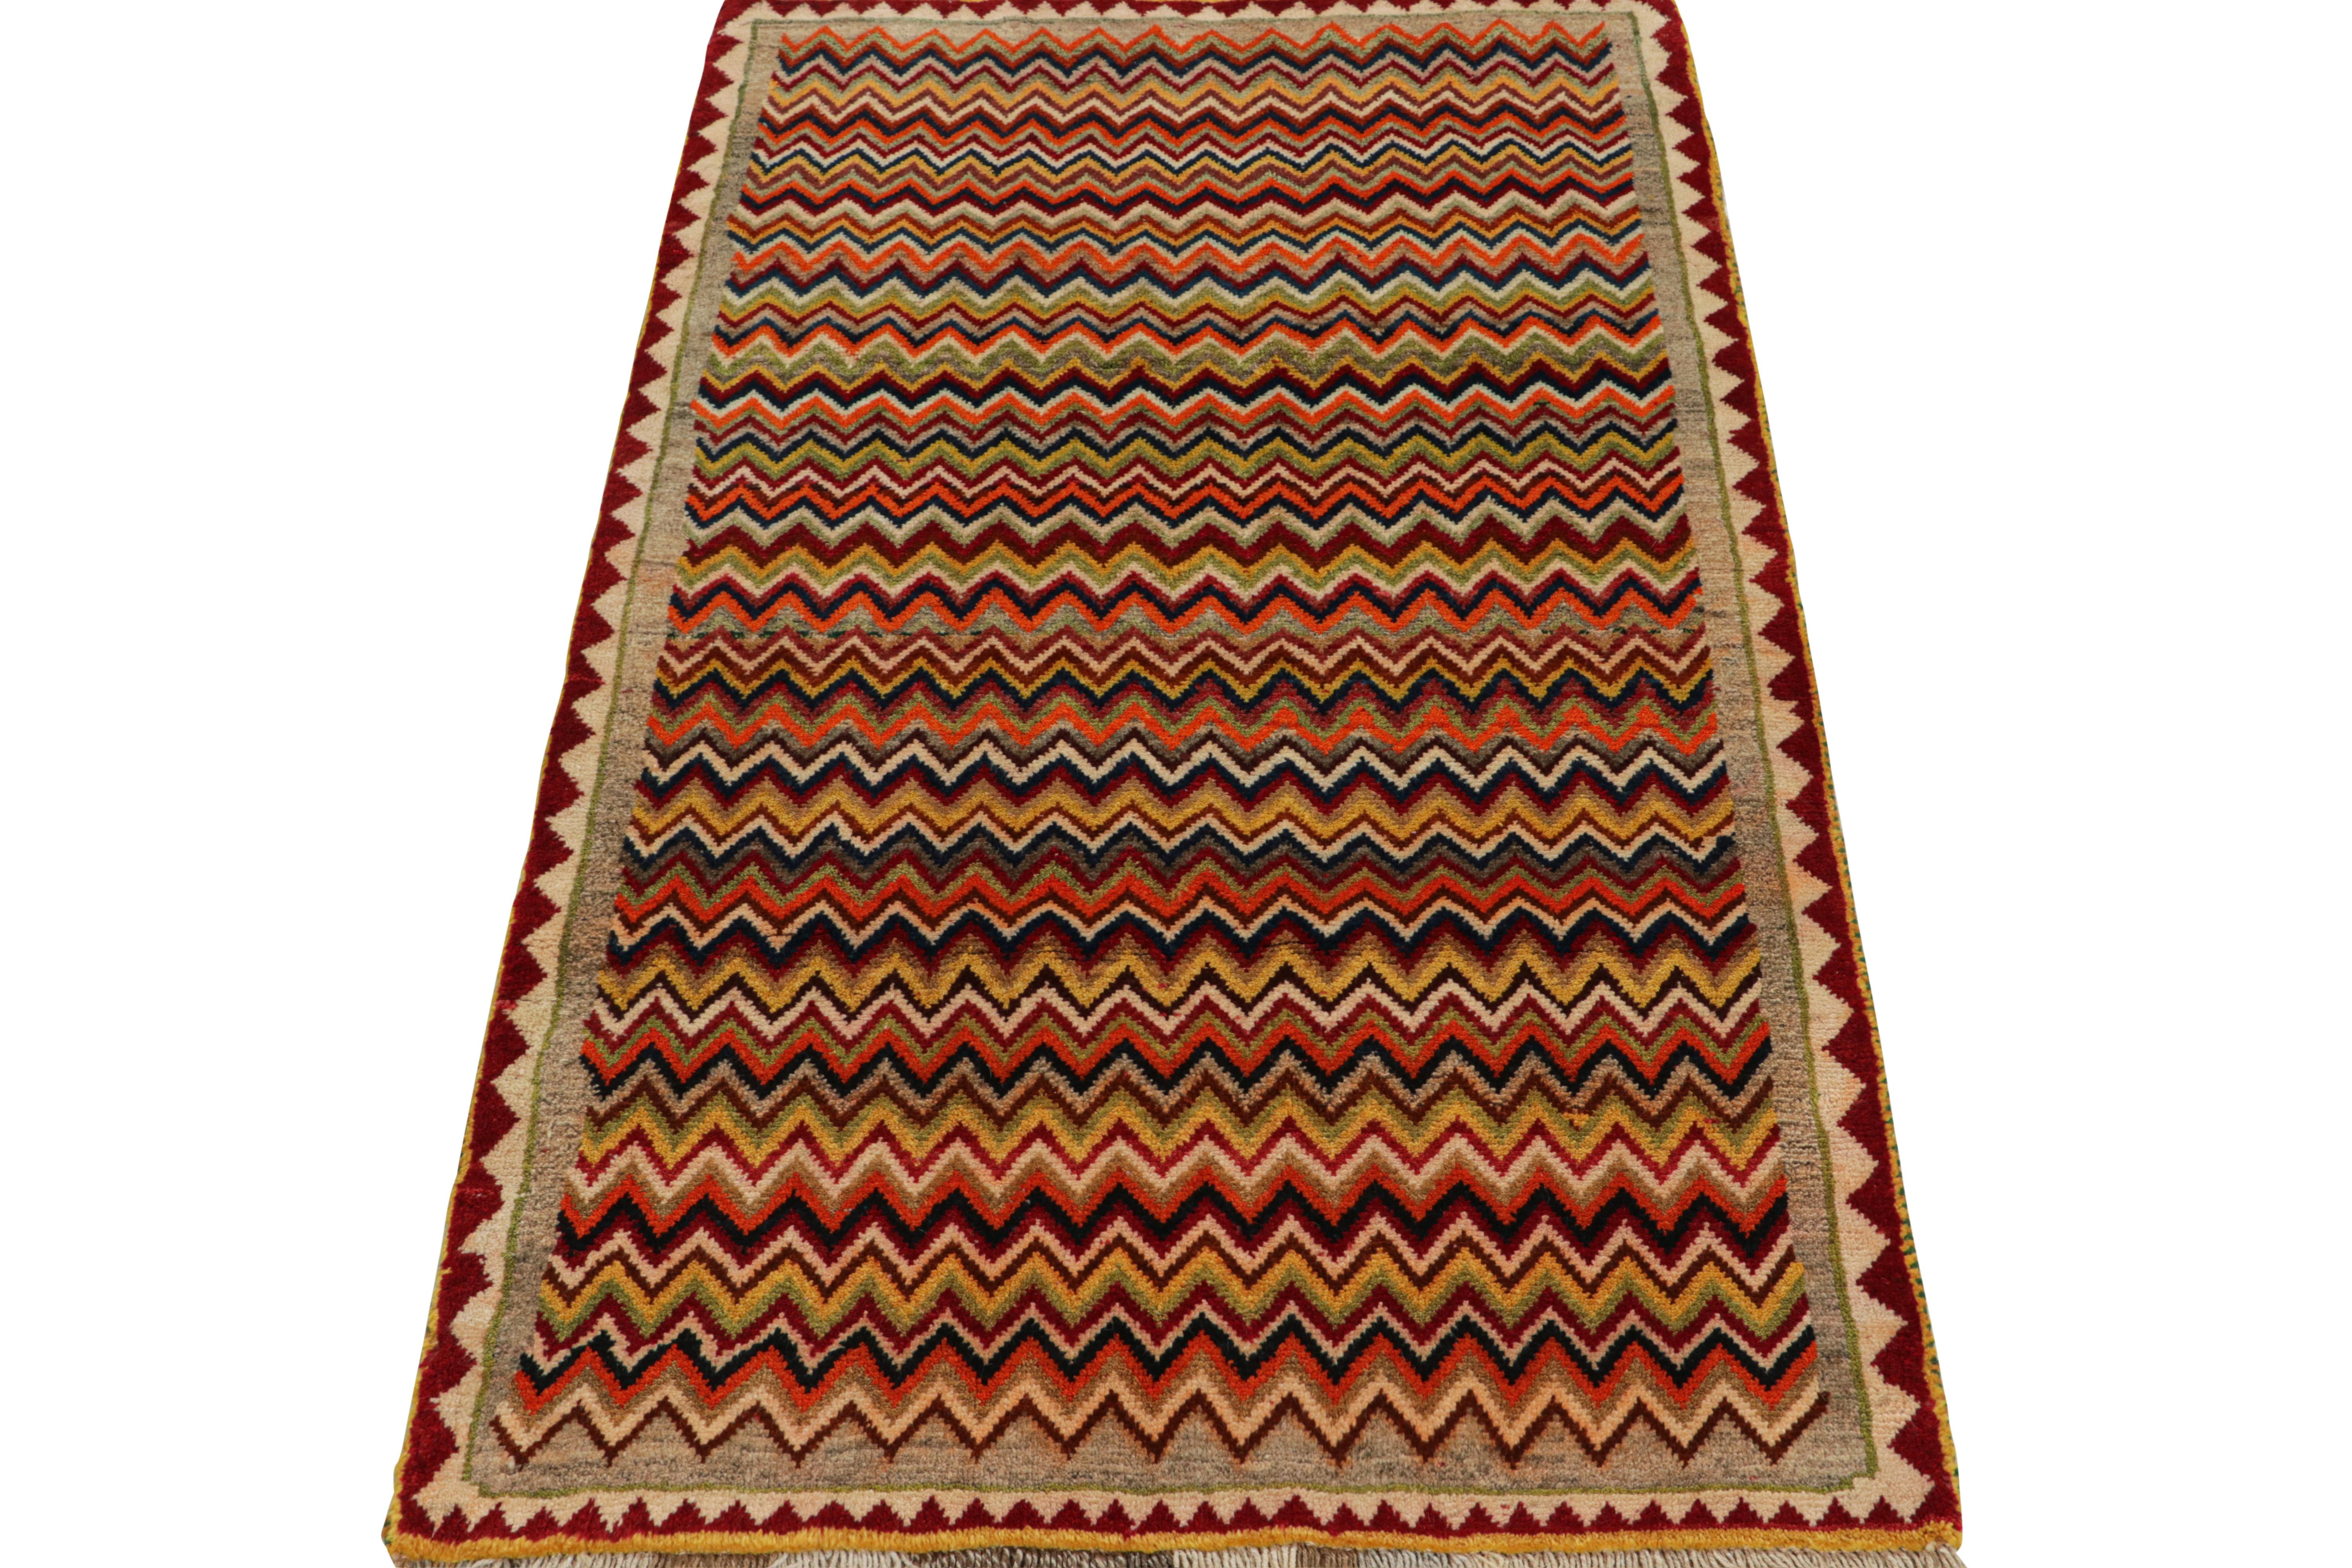 Hand-Knotted Vintage Gabbeh Persian Tribal Rug in Vibrant Chevron Patterns by Rug & Kilim For Sale